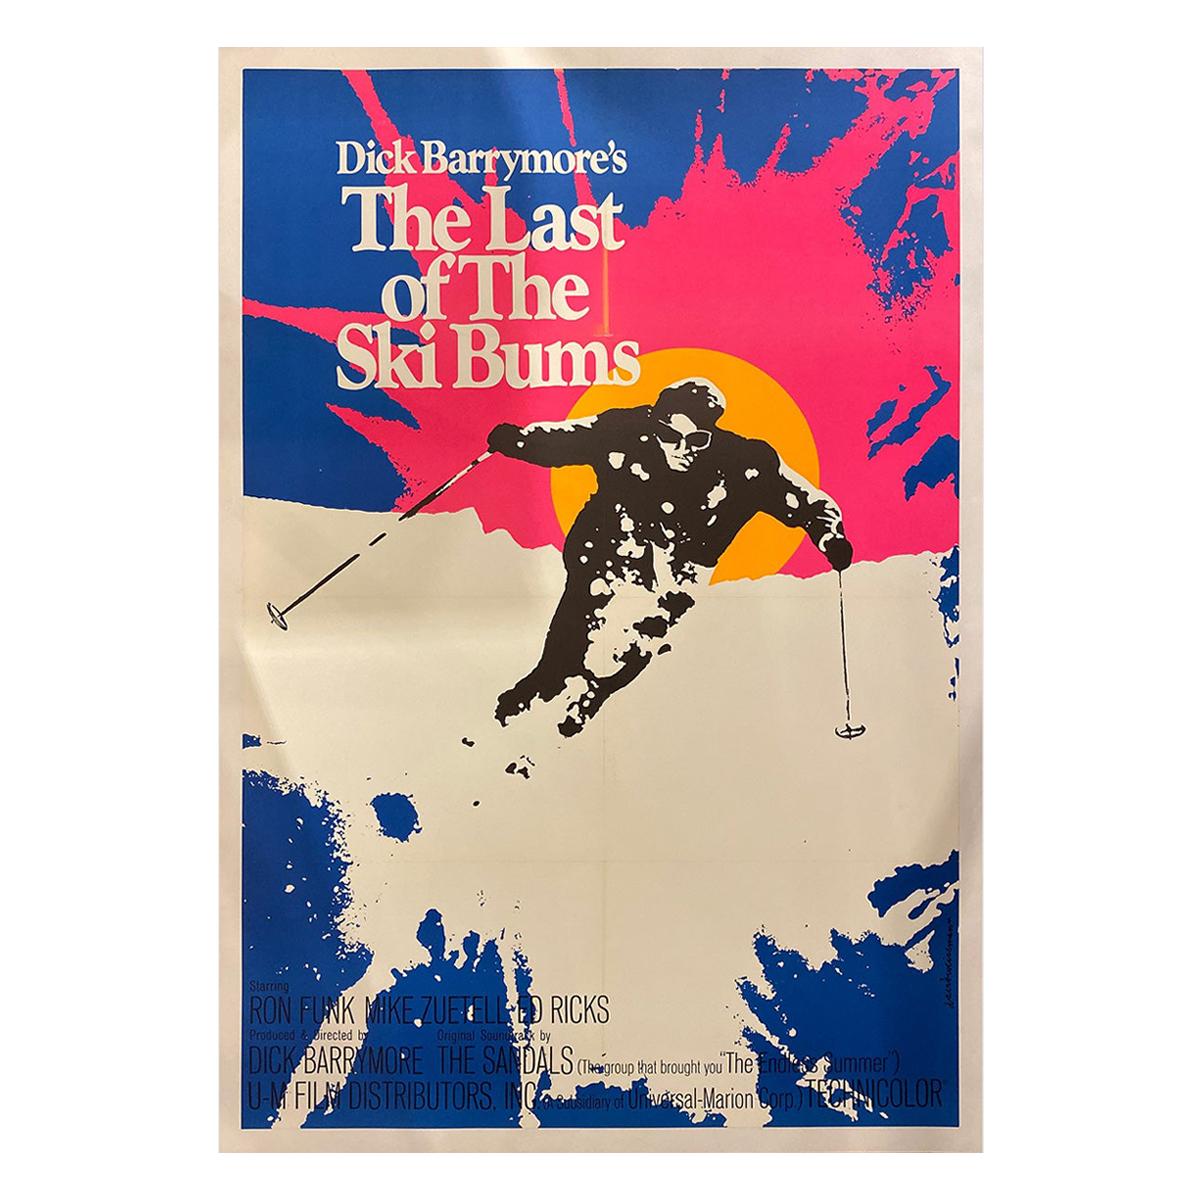 "The Last Of The Ski Bums", '1969' Poster